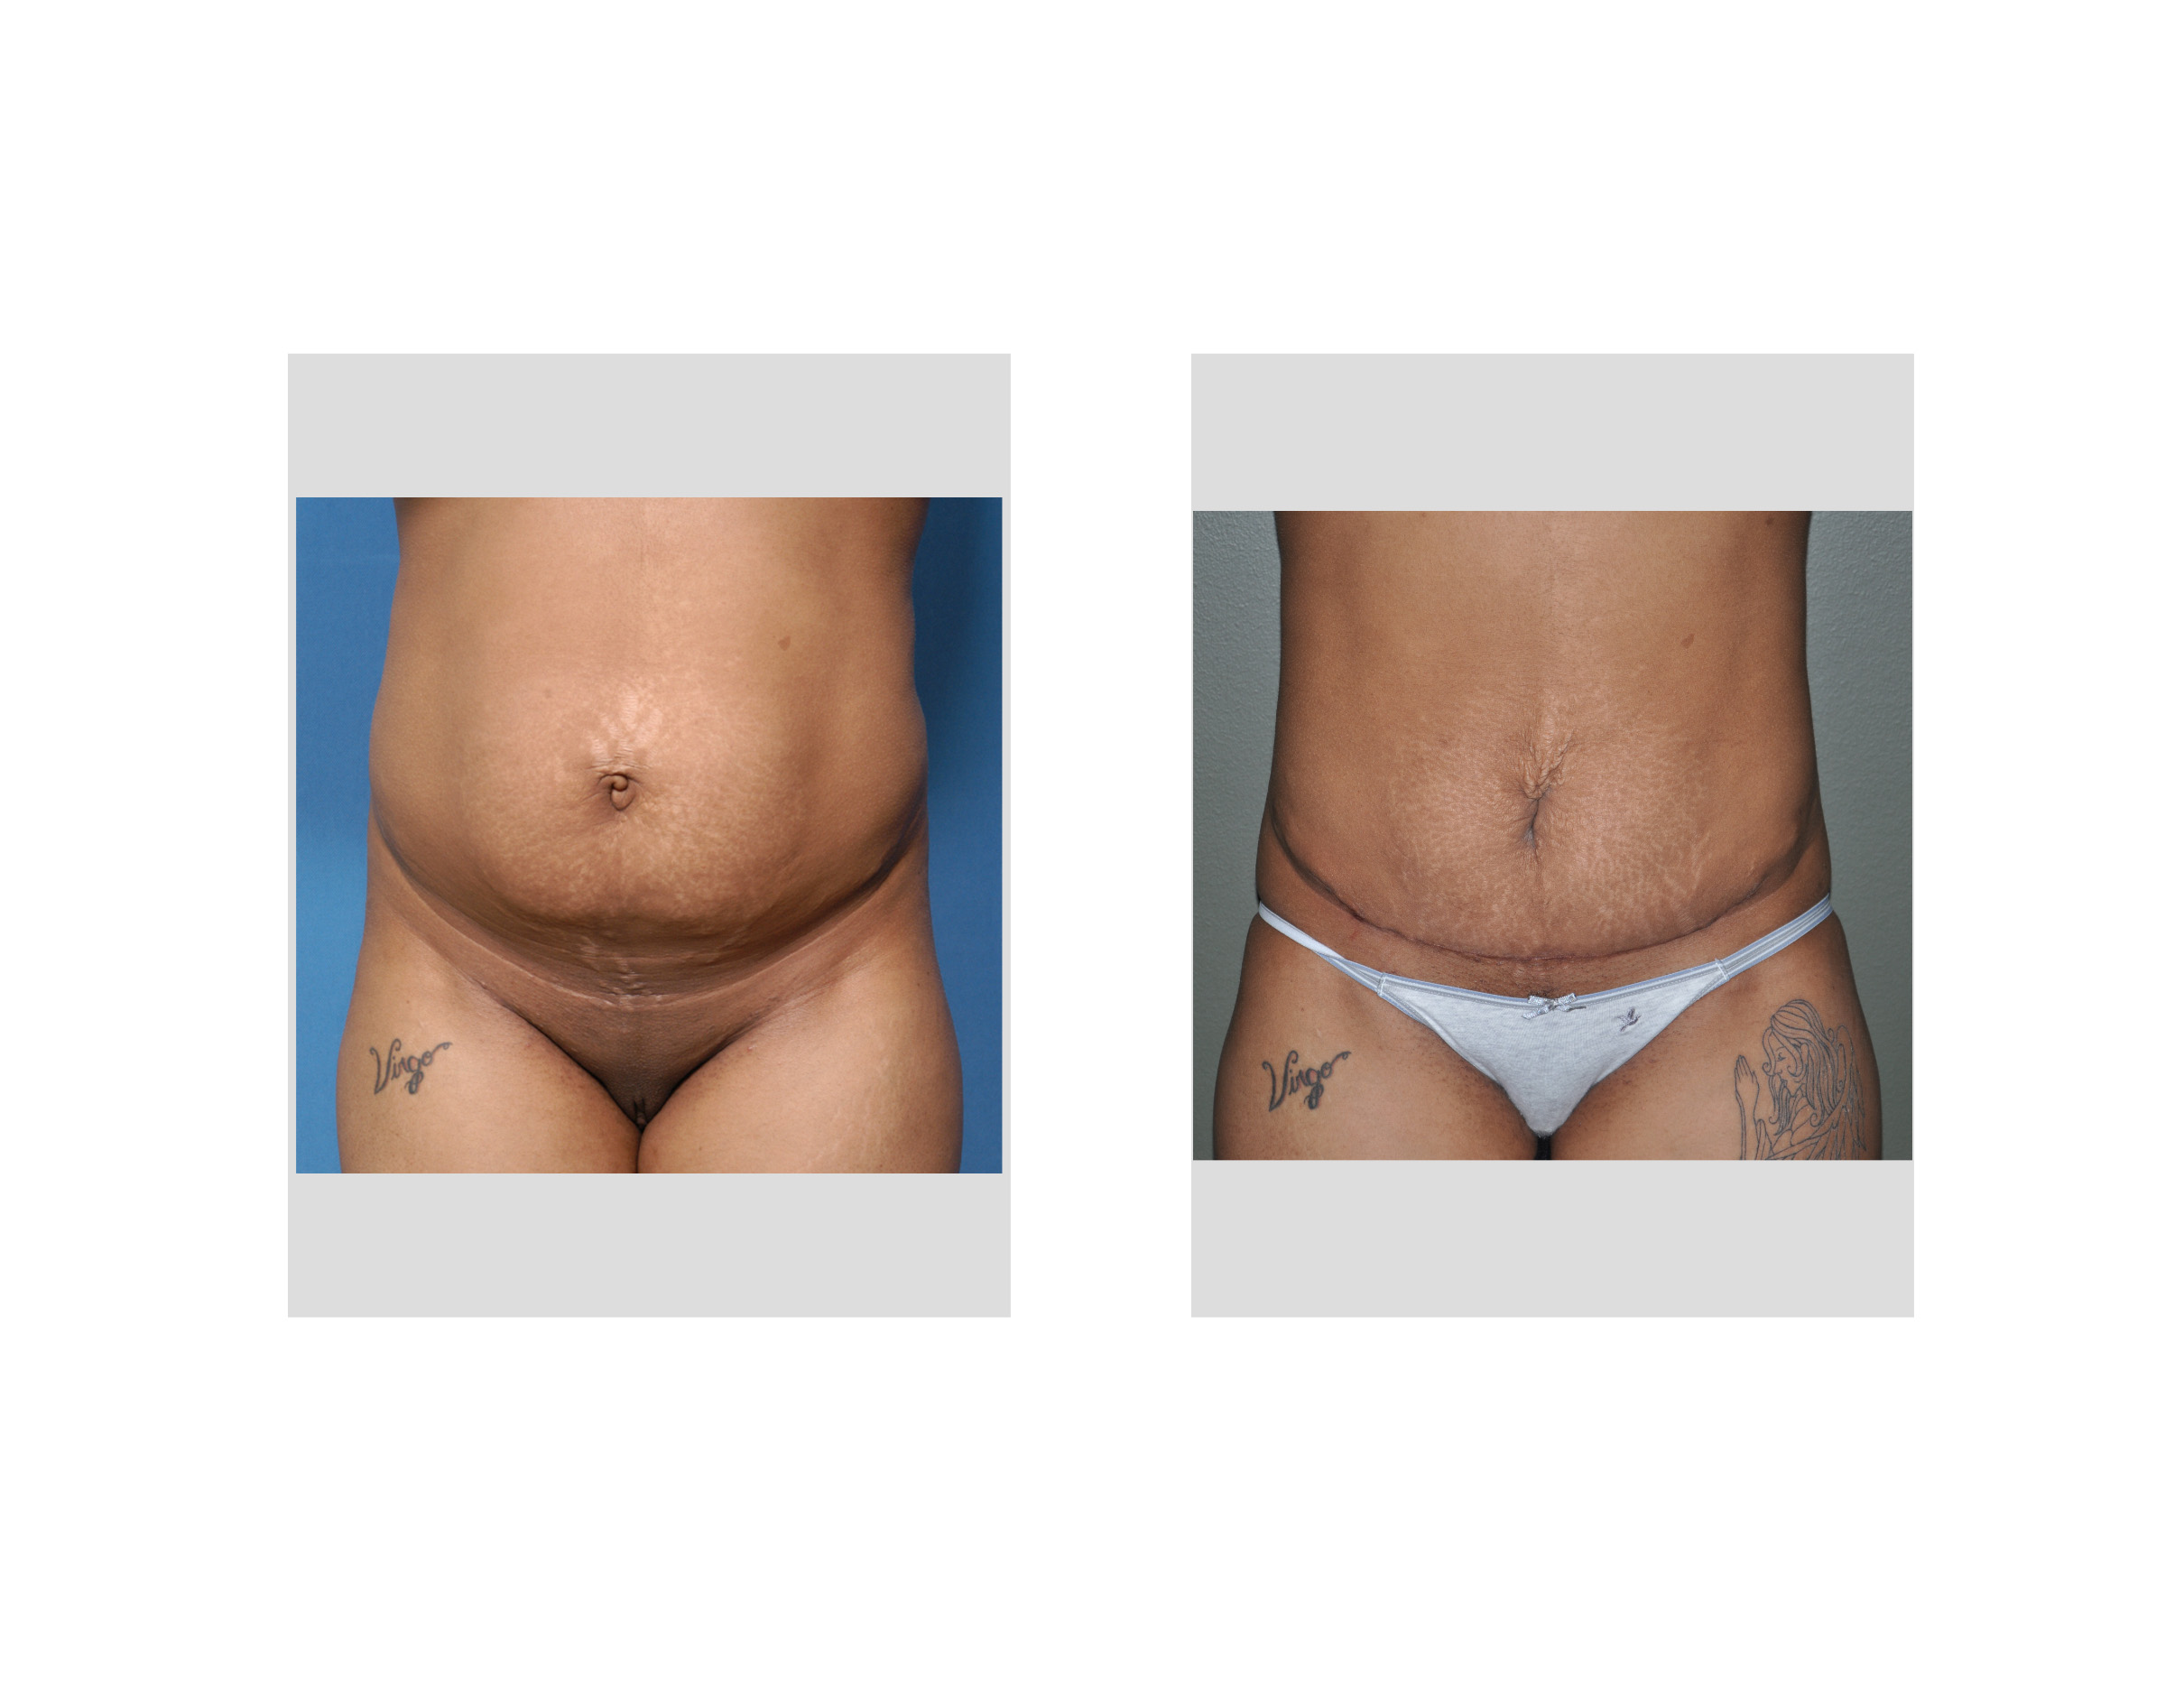 What Helps Tightness After a Tummy Tuck?